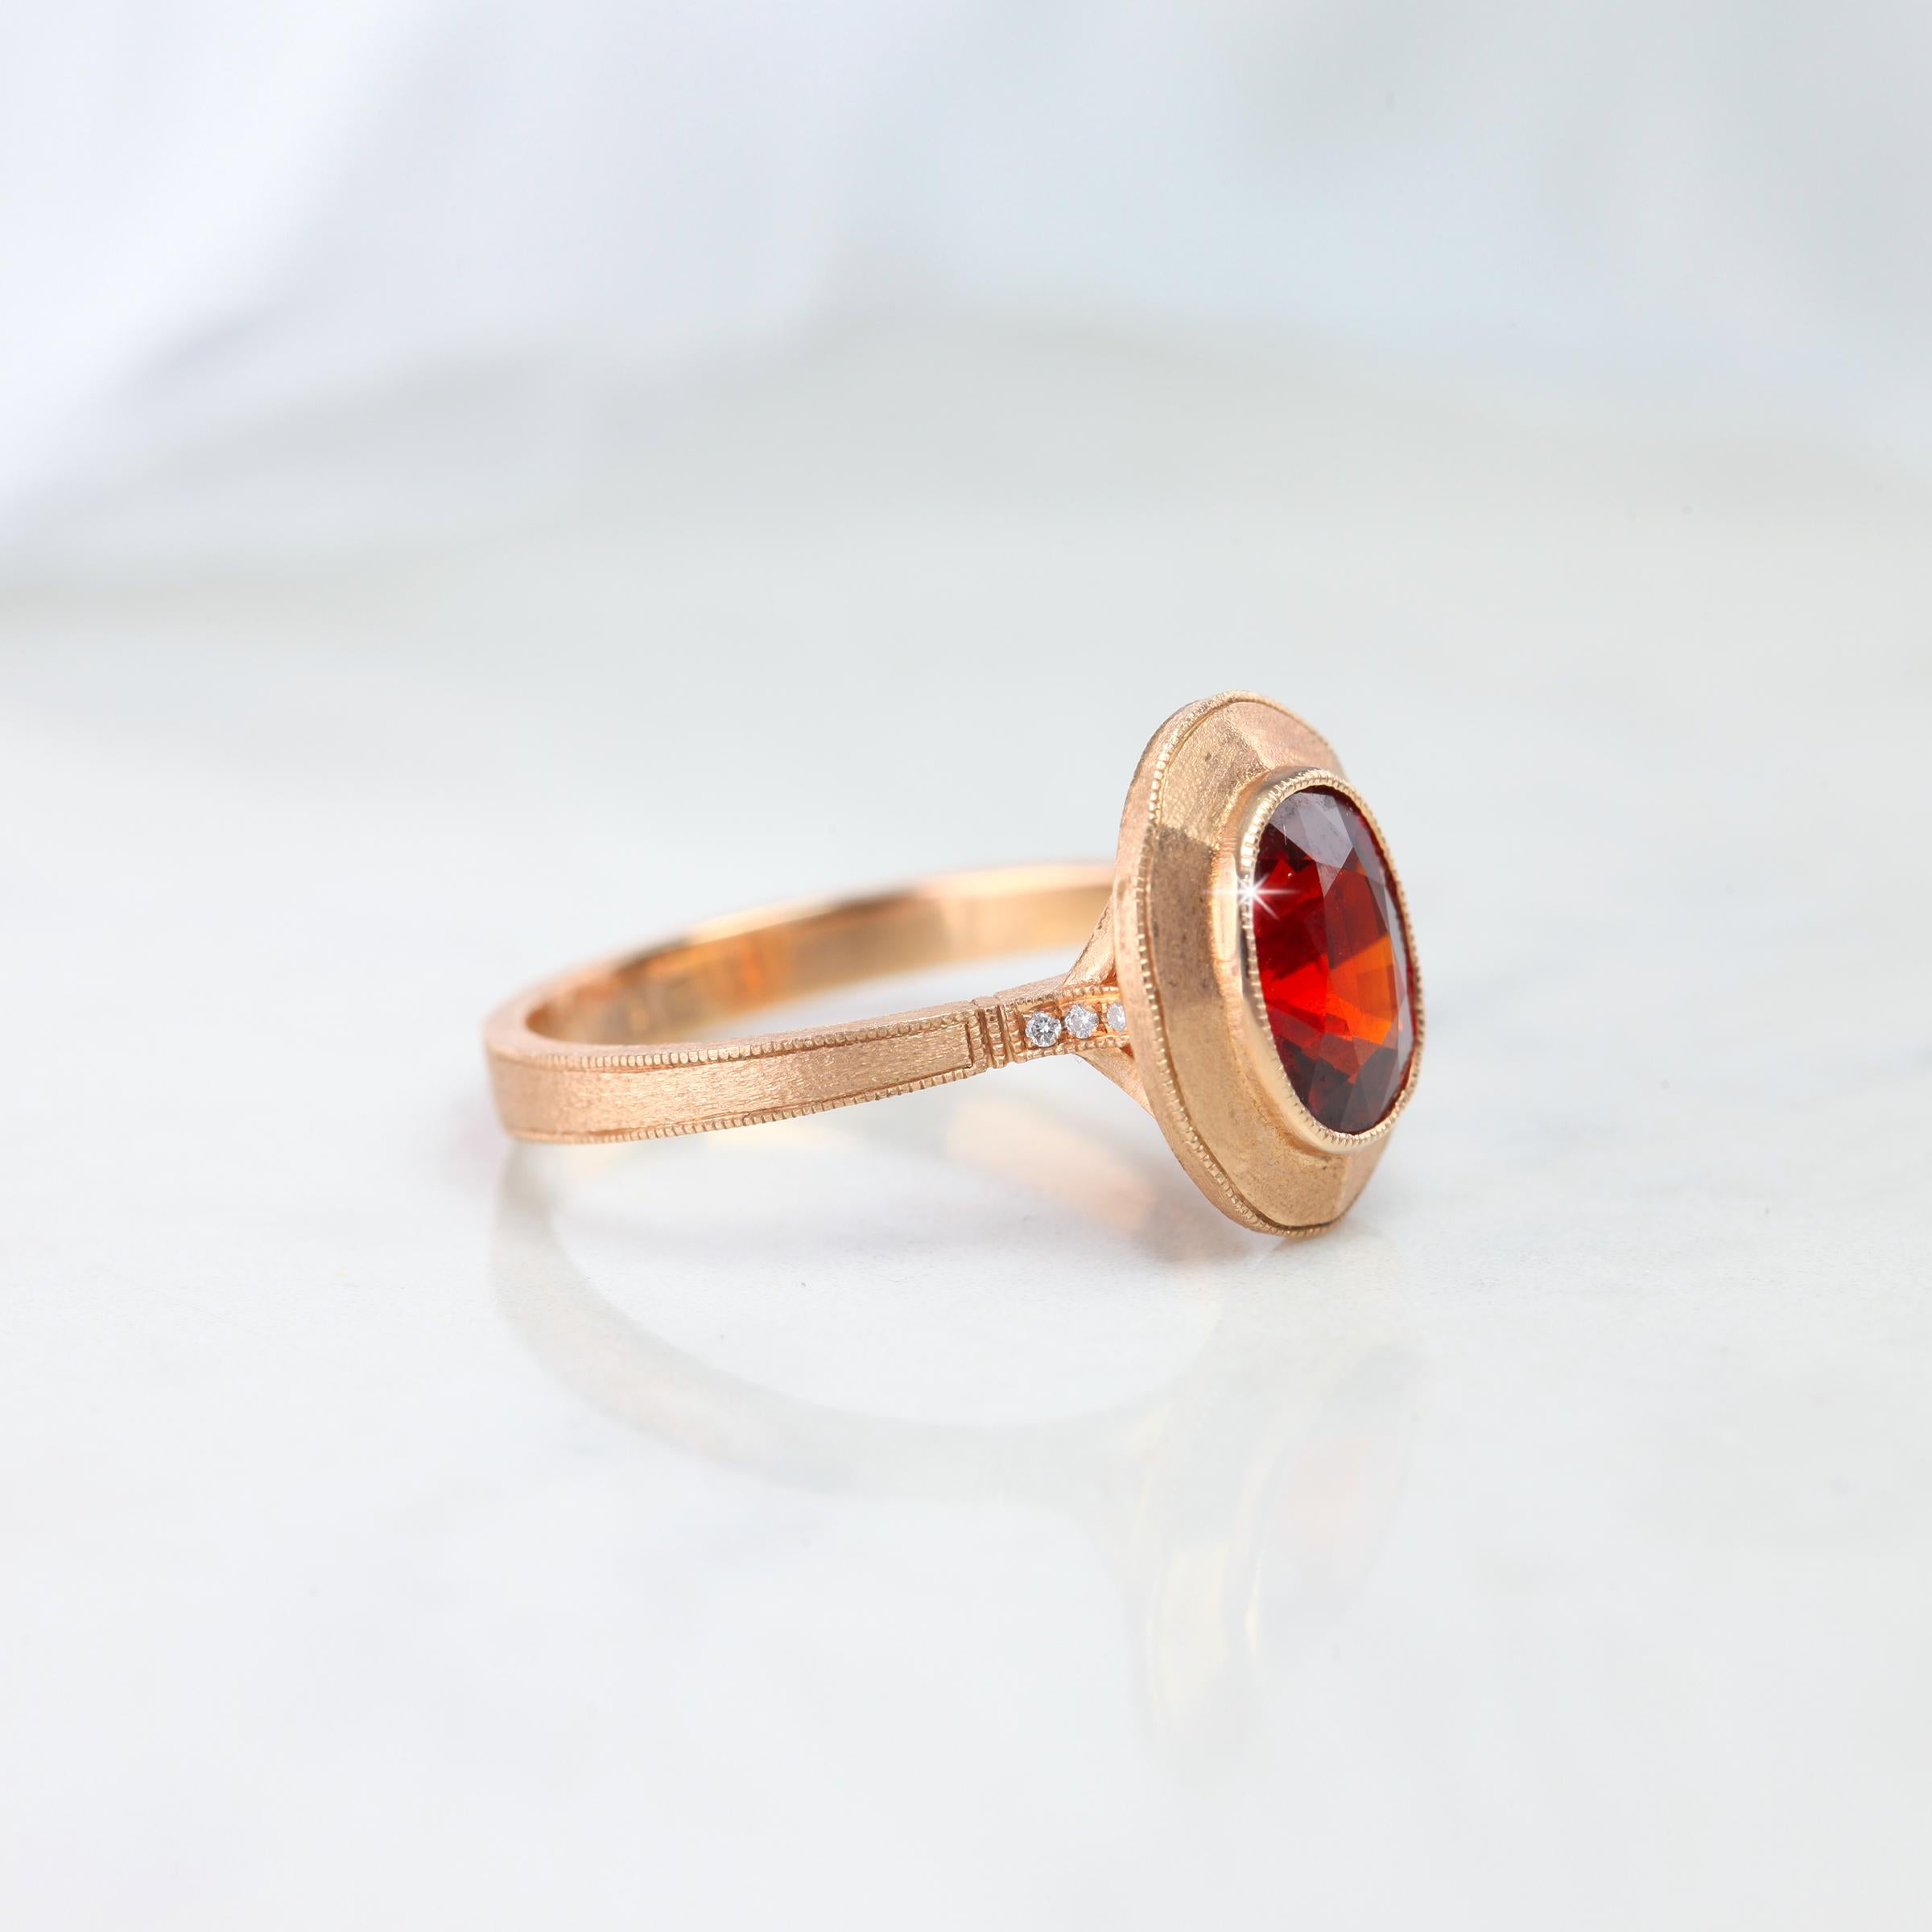 Vintage Style 2.57 Carat Oval Garnet Gemstone Ring - 14K Mate Rose Gold 2,57 Ct Oval Garnet Ring, Gemstone Ring created by hands from ring to the stone shapes. 

I used brillant brillant diamonds and gold frame  to reveal a vintage style oval shaped